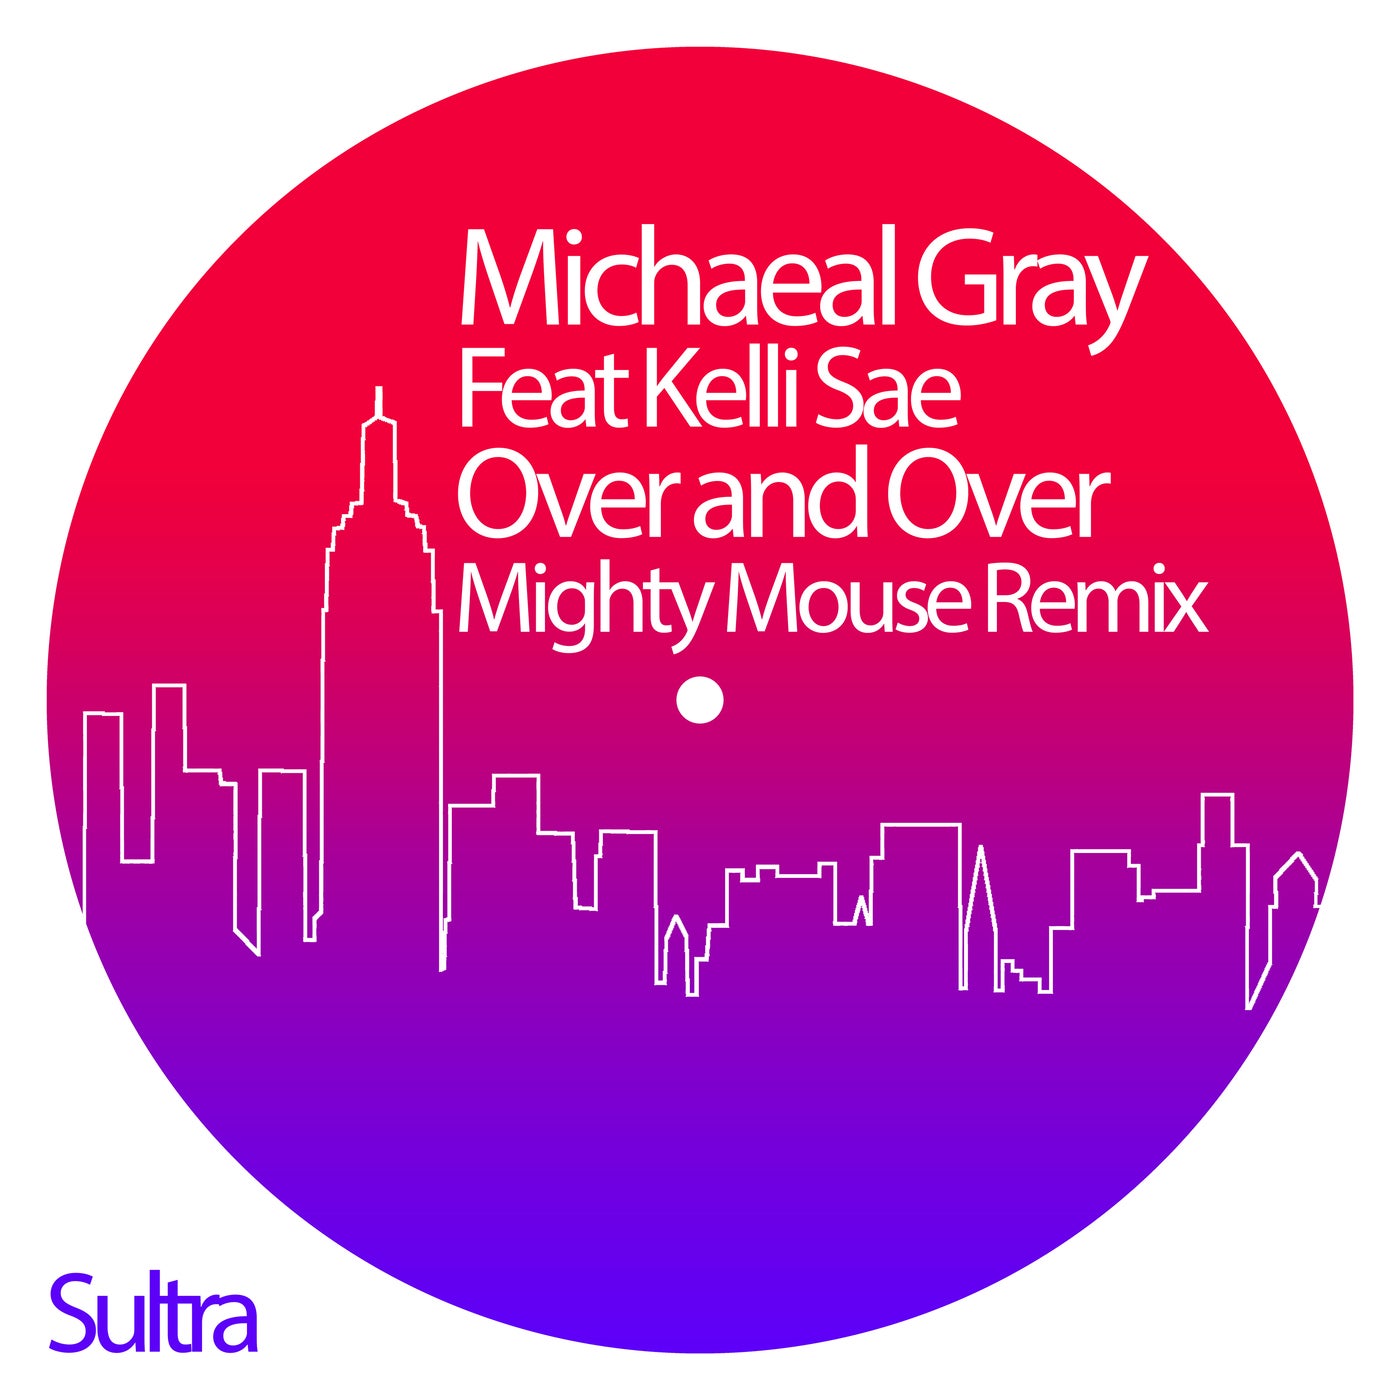 Over and Over - Mighty Mouse Remix